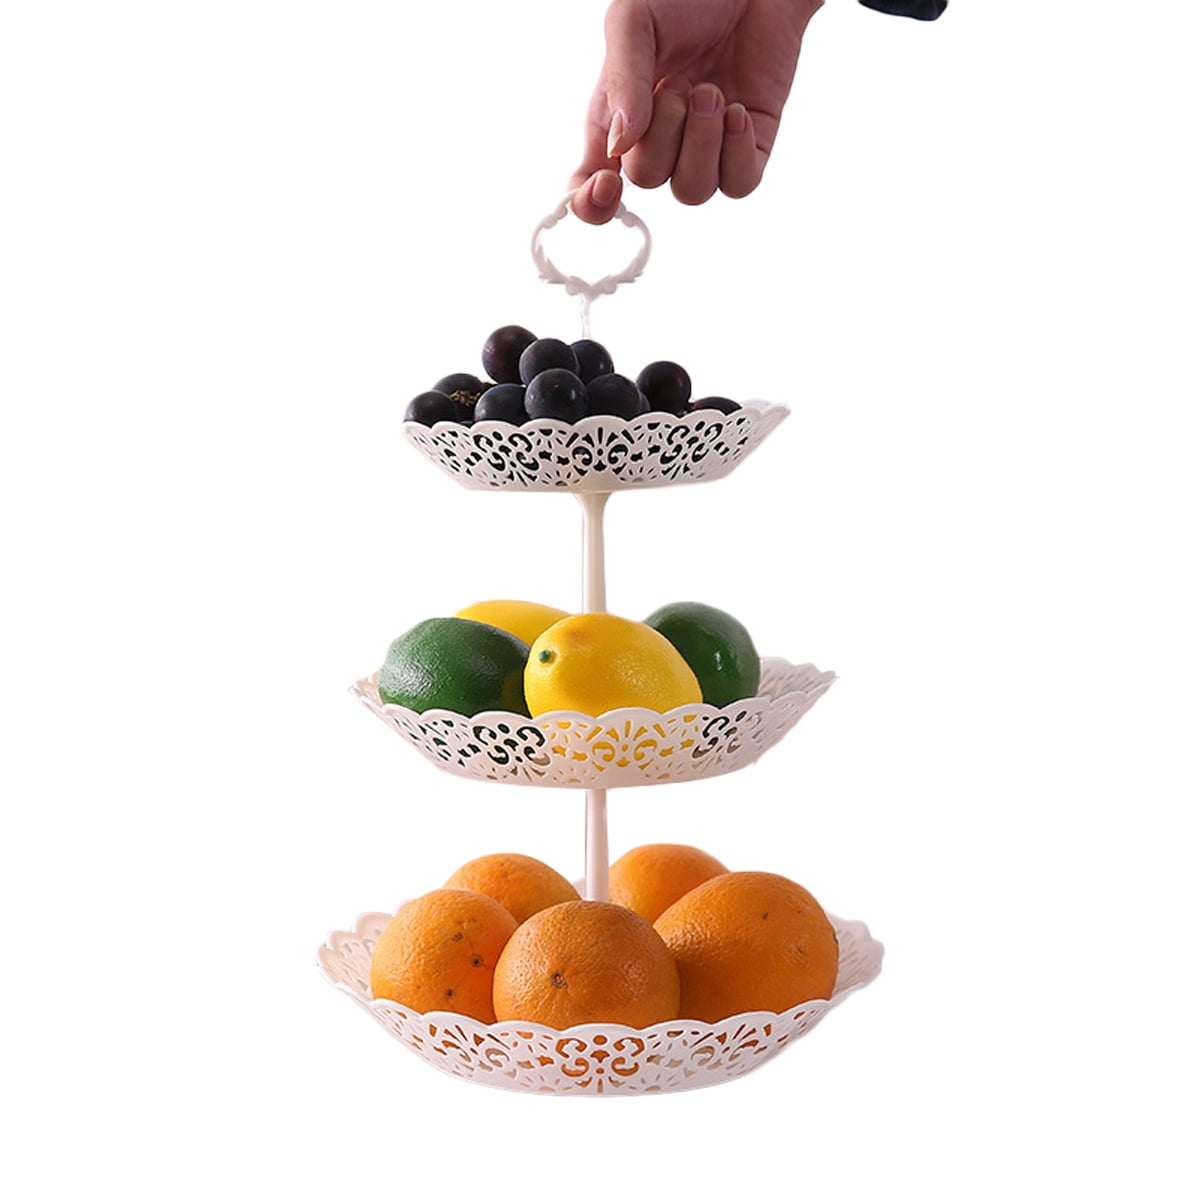 3-tier Hollow Fruit Basket Display Stand Holder for Snacks Cookies Candies 